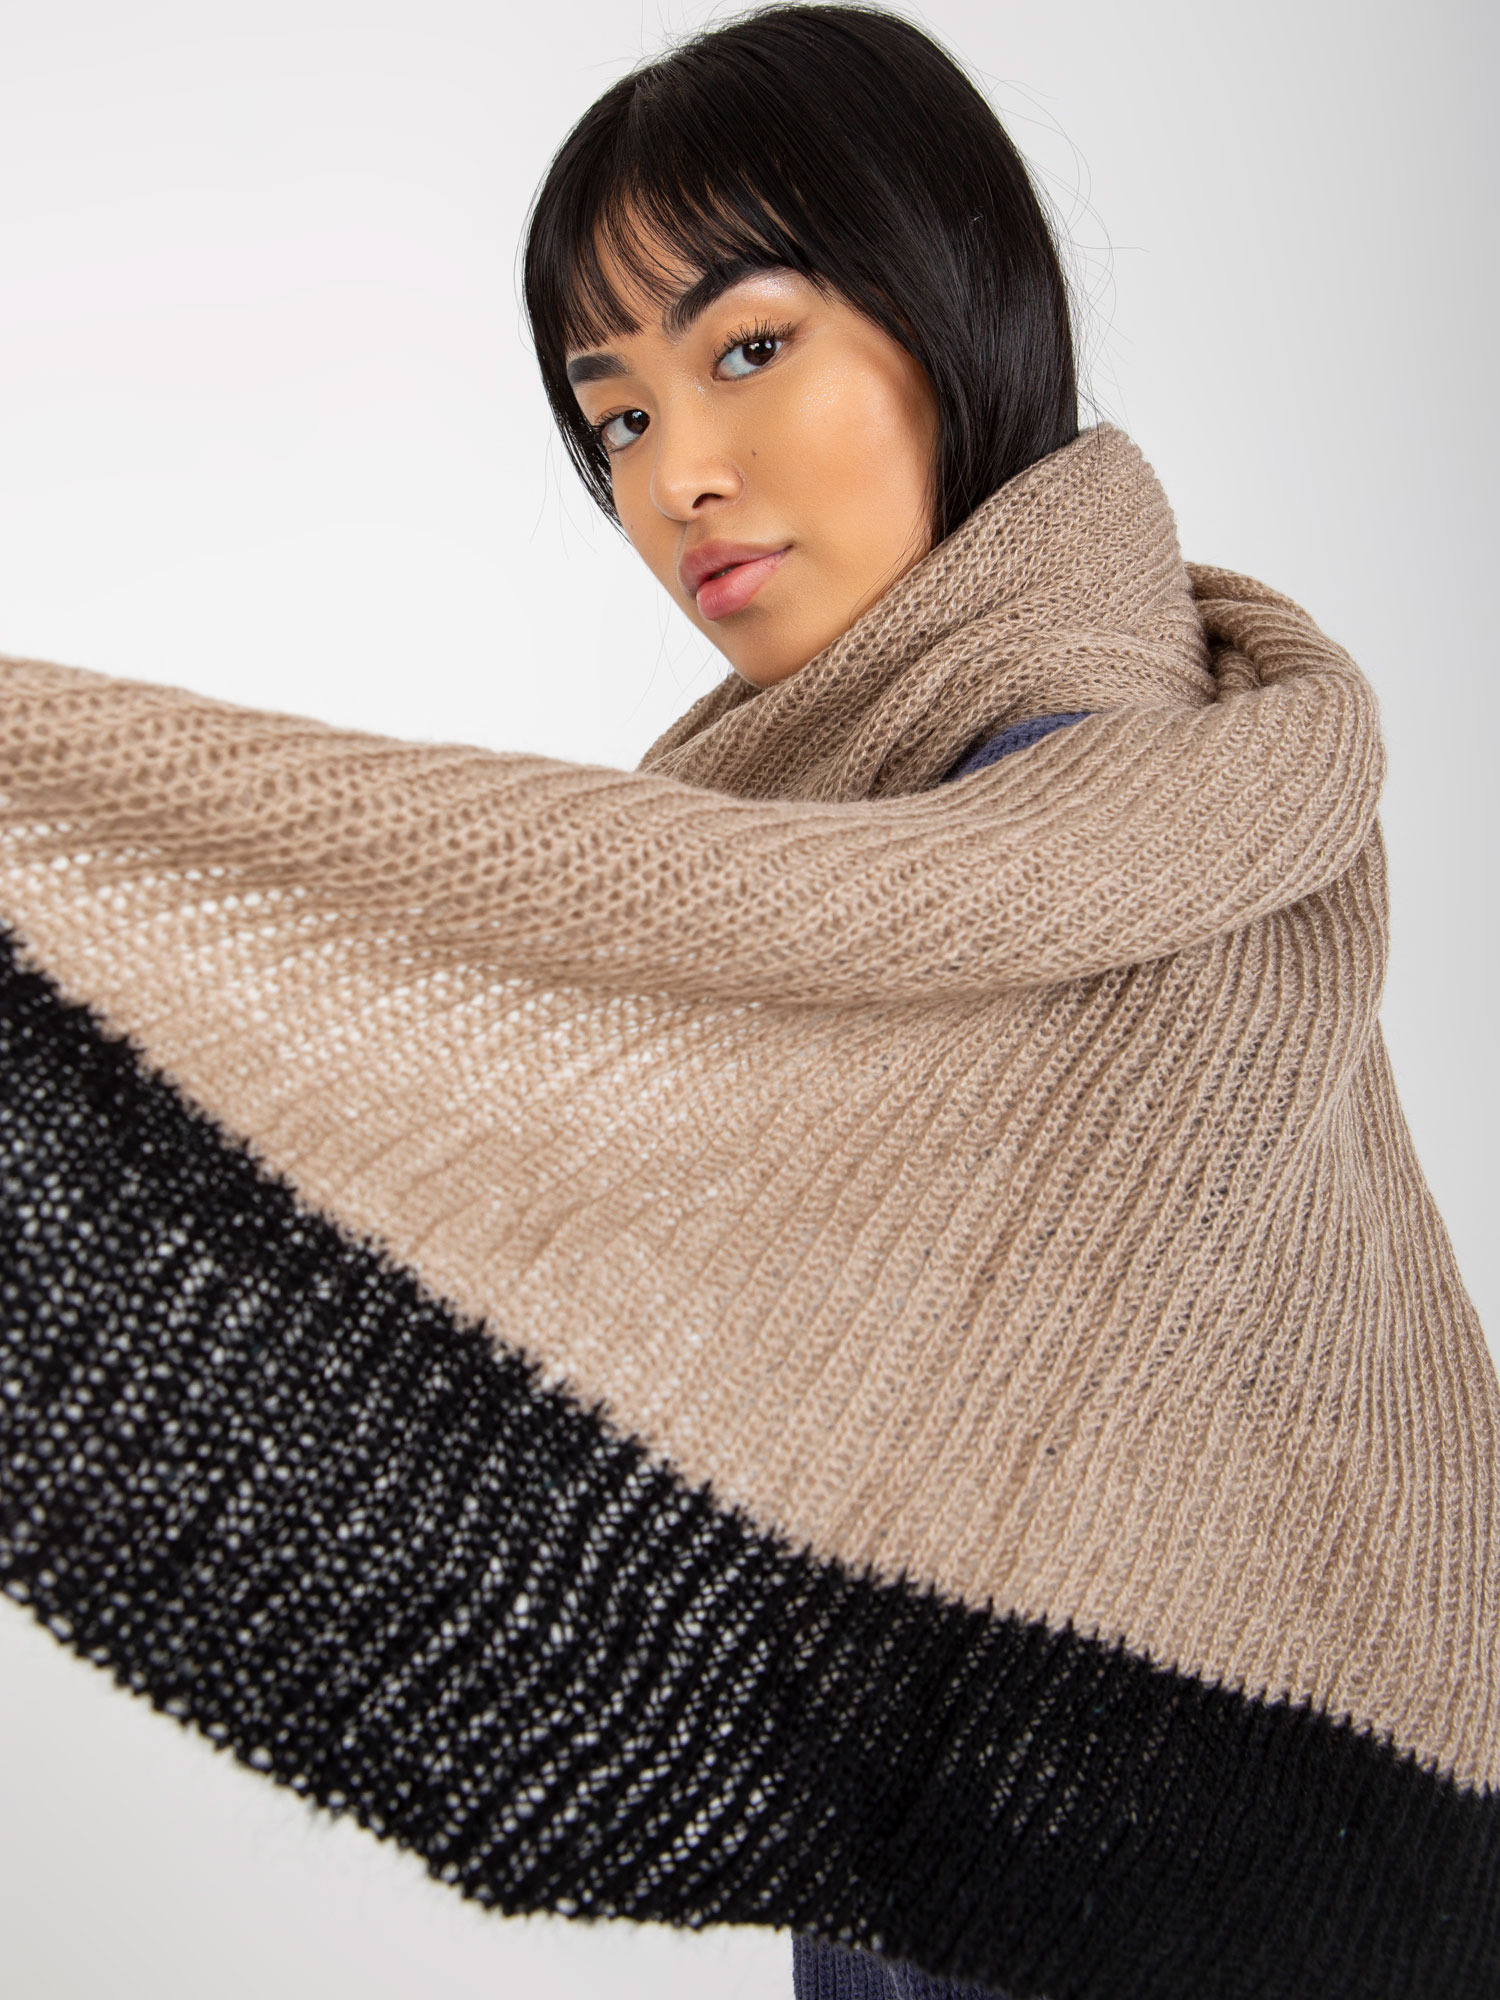 Beige-black long knitted scarf for women